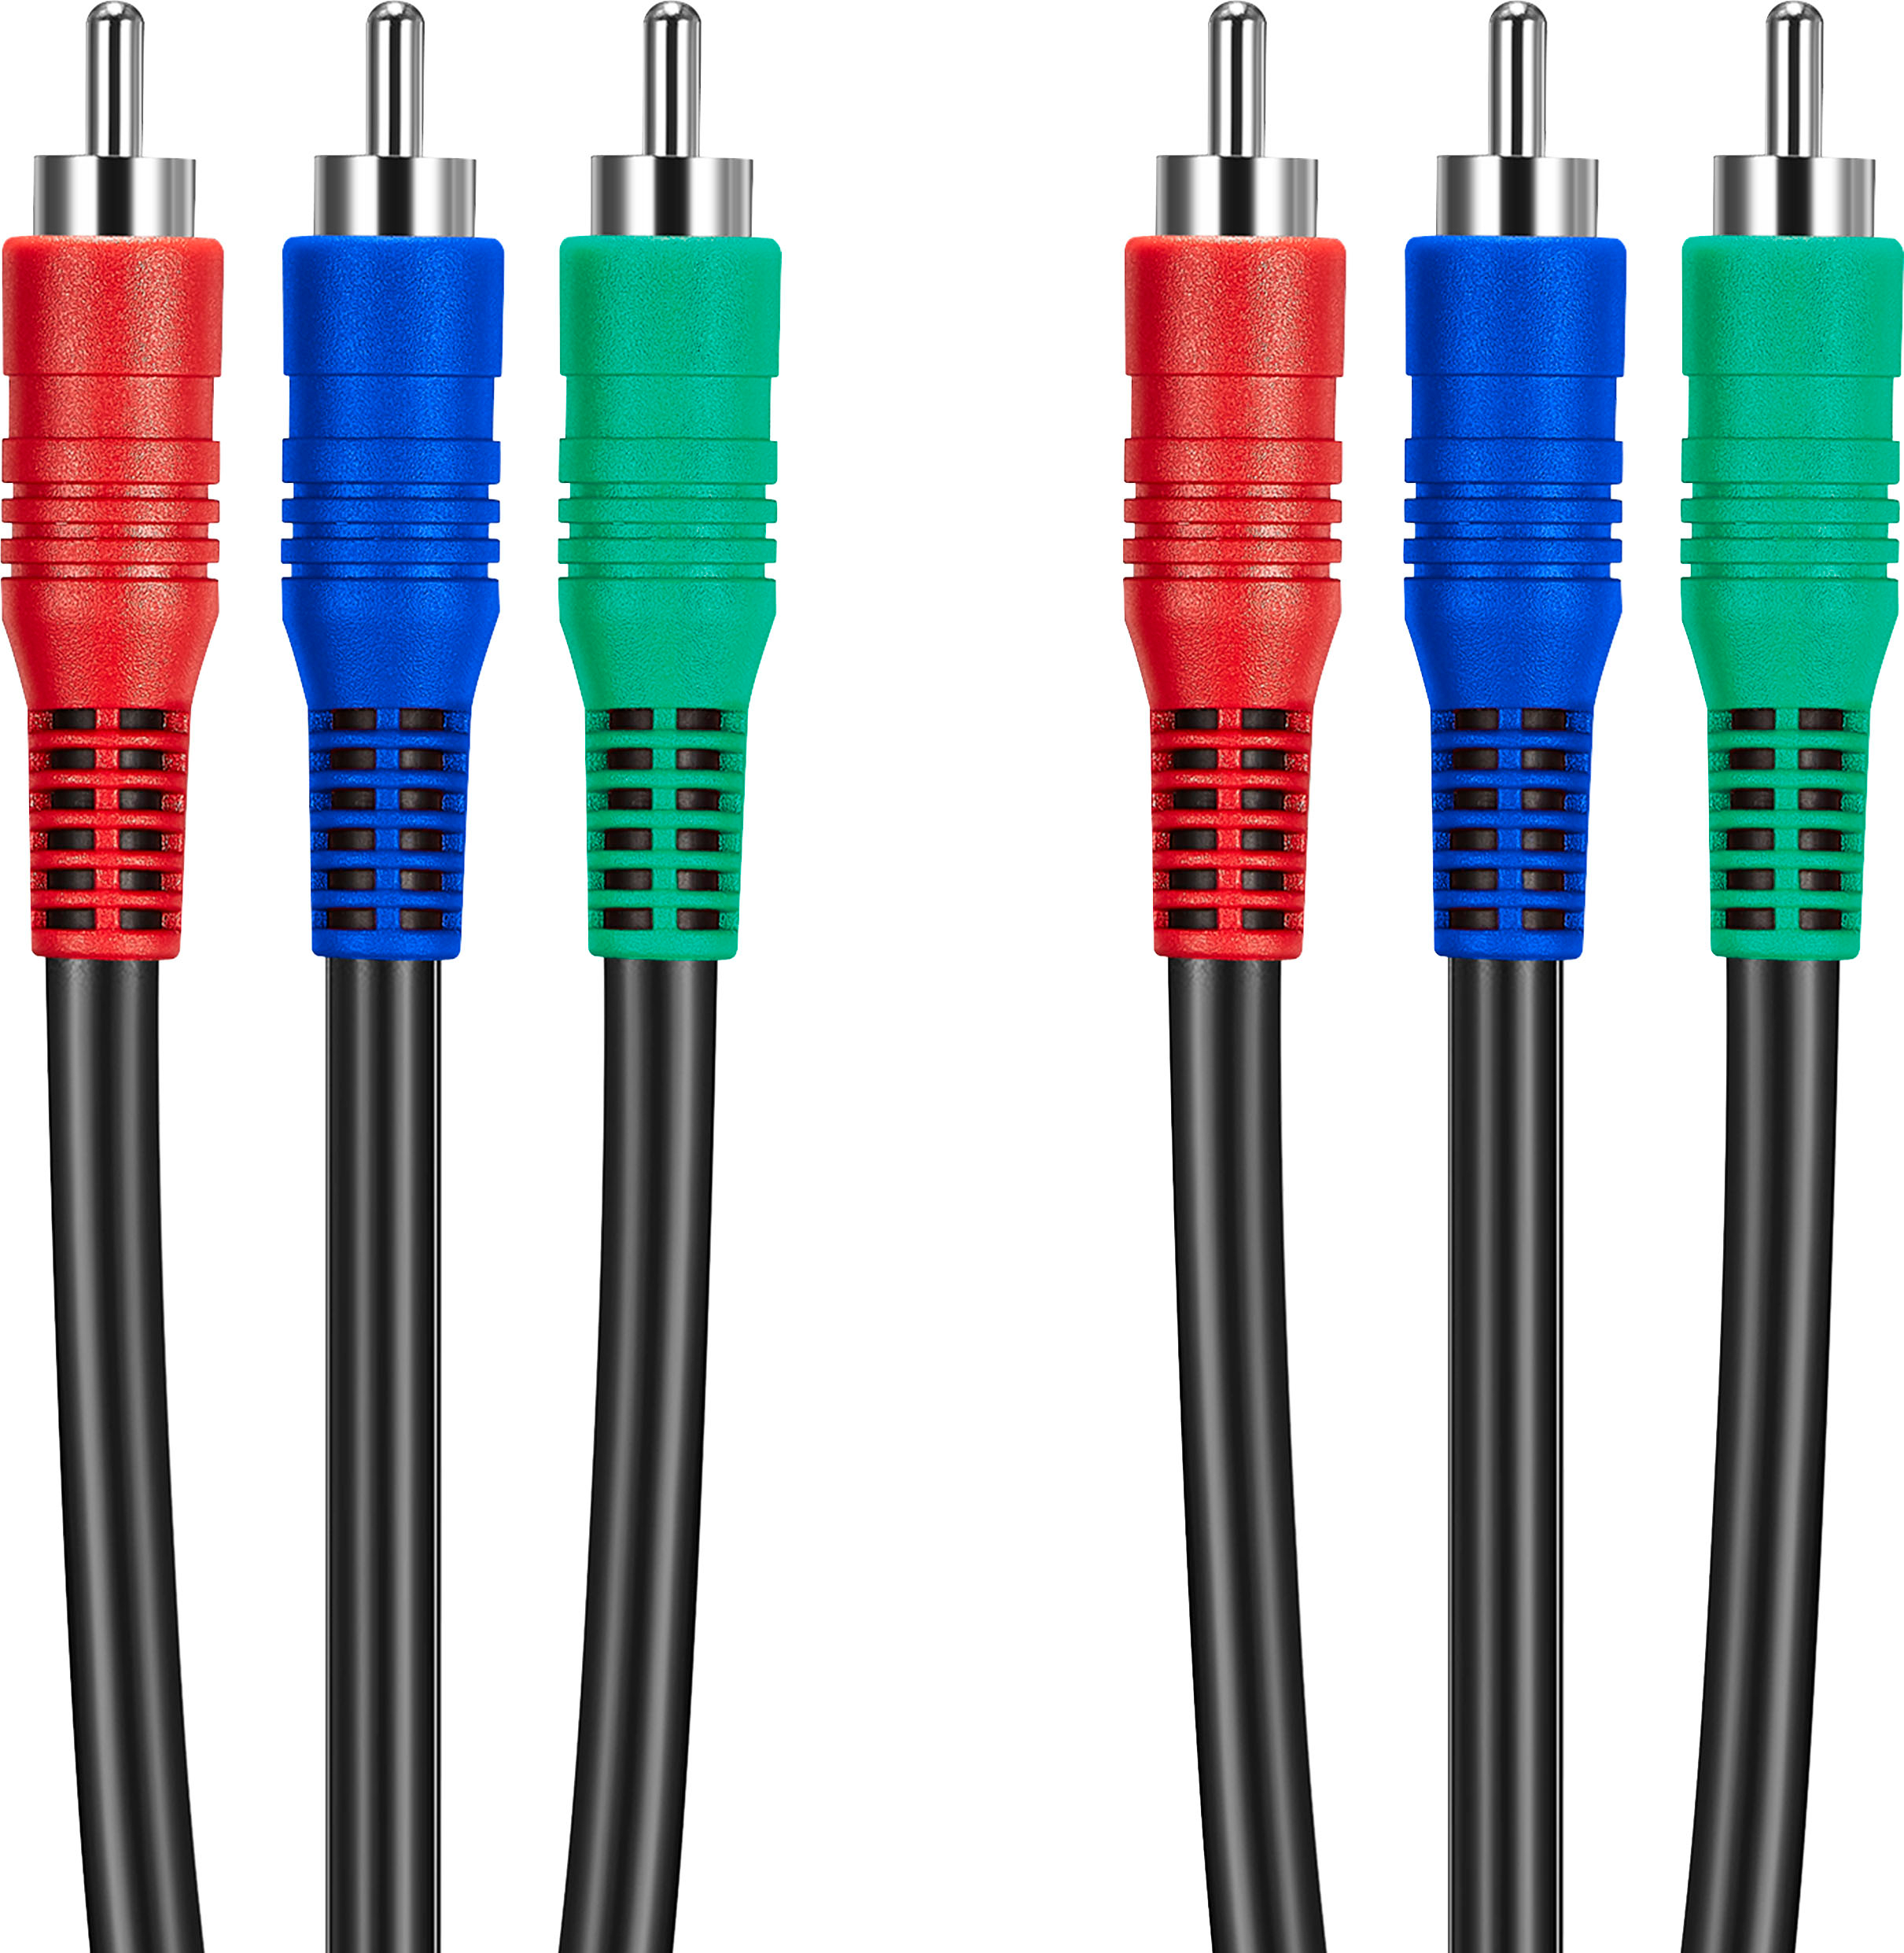 Types of Video Cables - The Home Depot